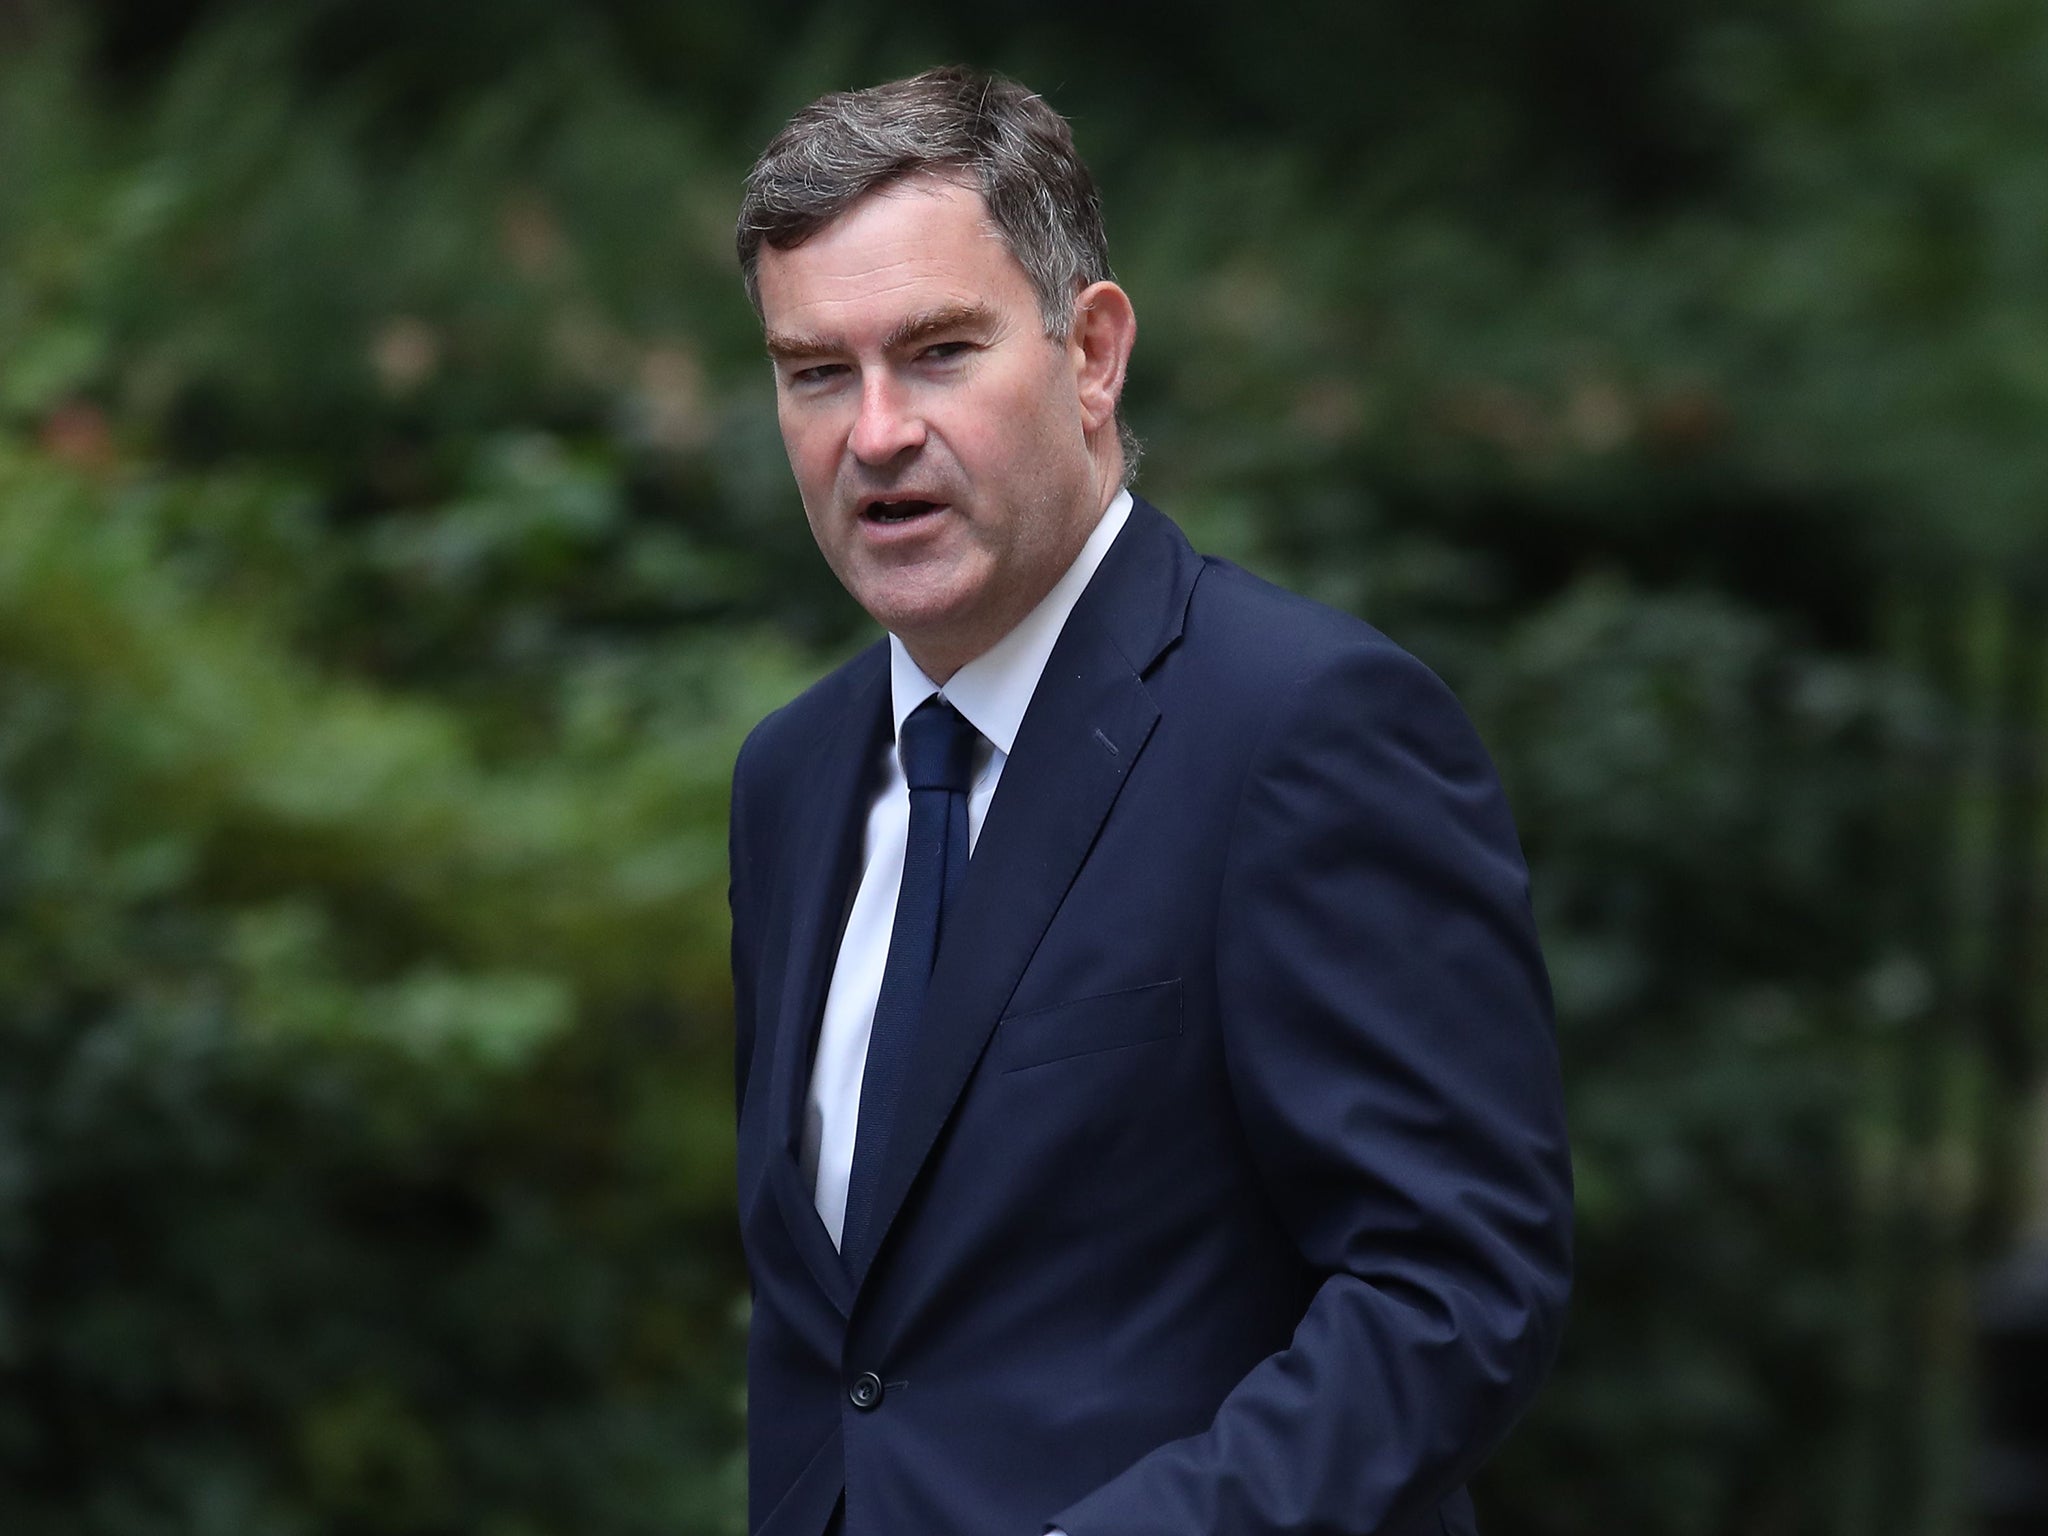 David Gauke said: 'Whilst no amount of compensation can make up for the immense suffering endured by victims of violent crime, it is vital they receive the help and support needed to rebuild their lives'